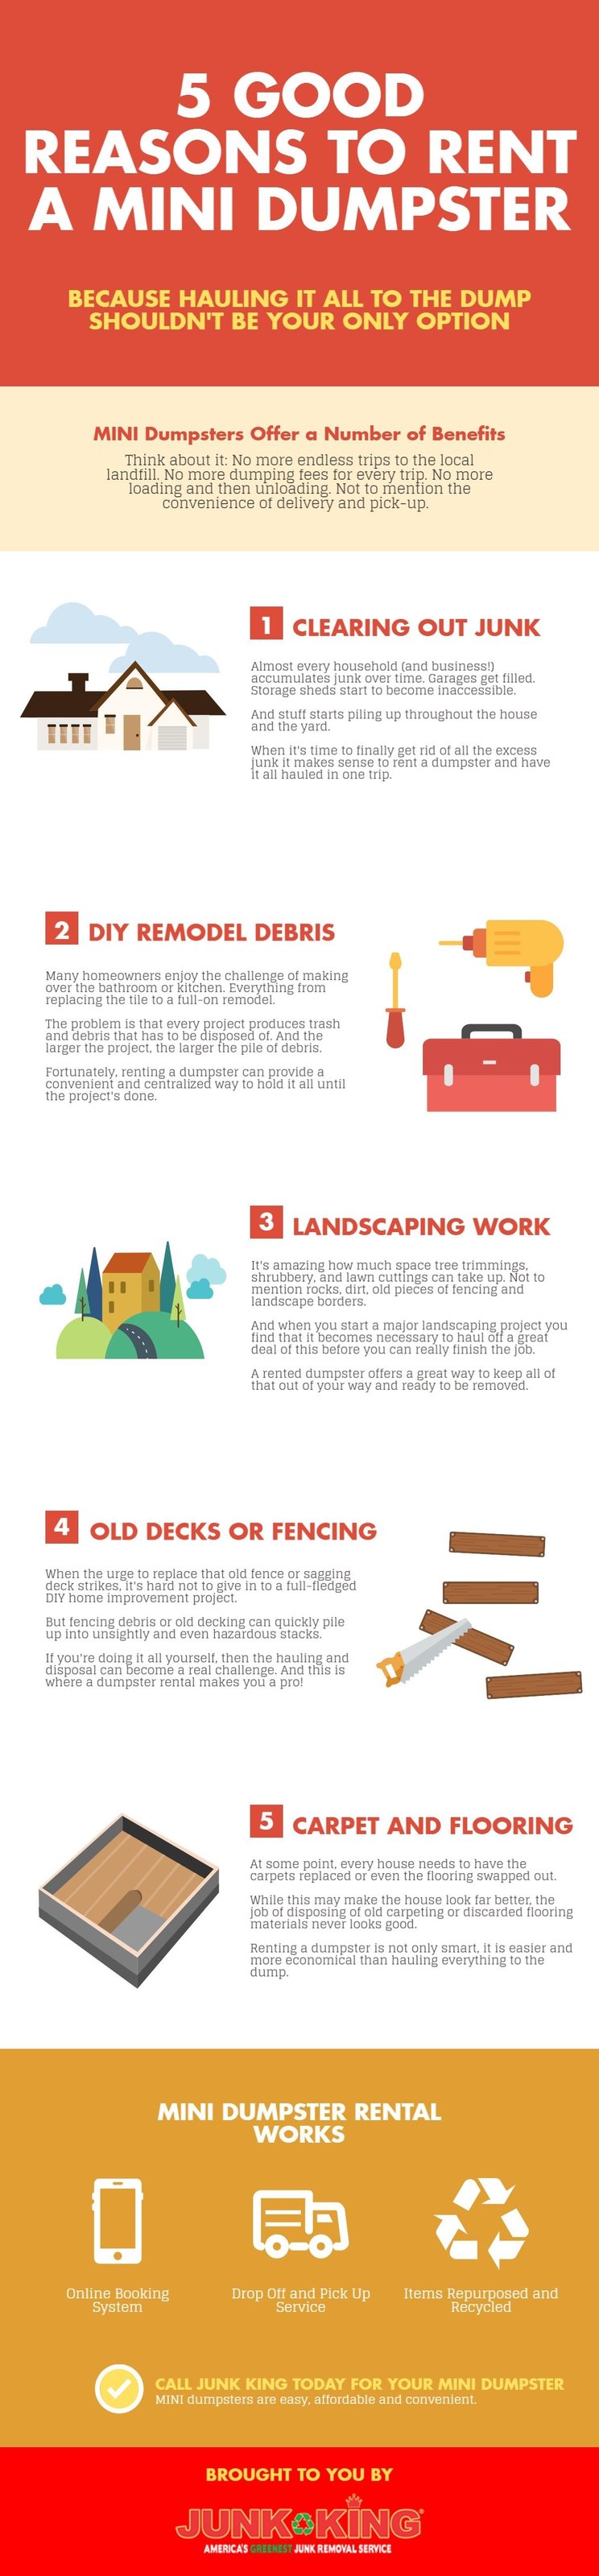 a-new-approach-to-dumpster-rentals-for-winter-projects-infographic